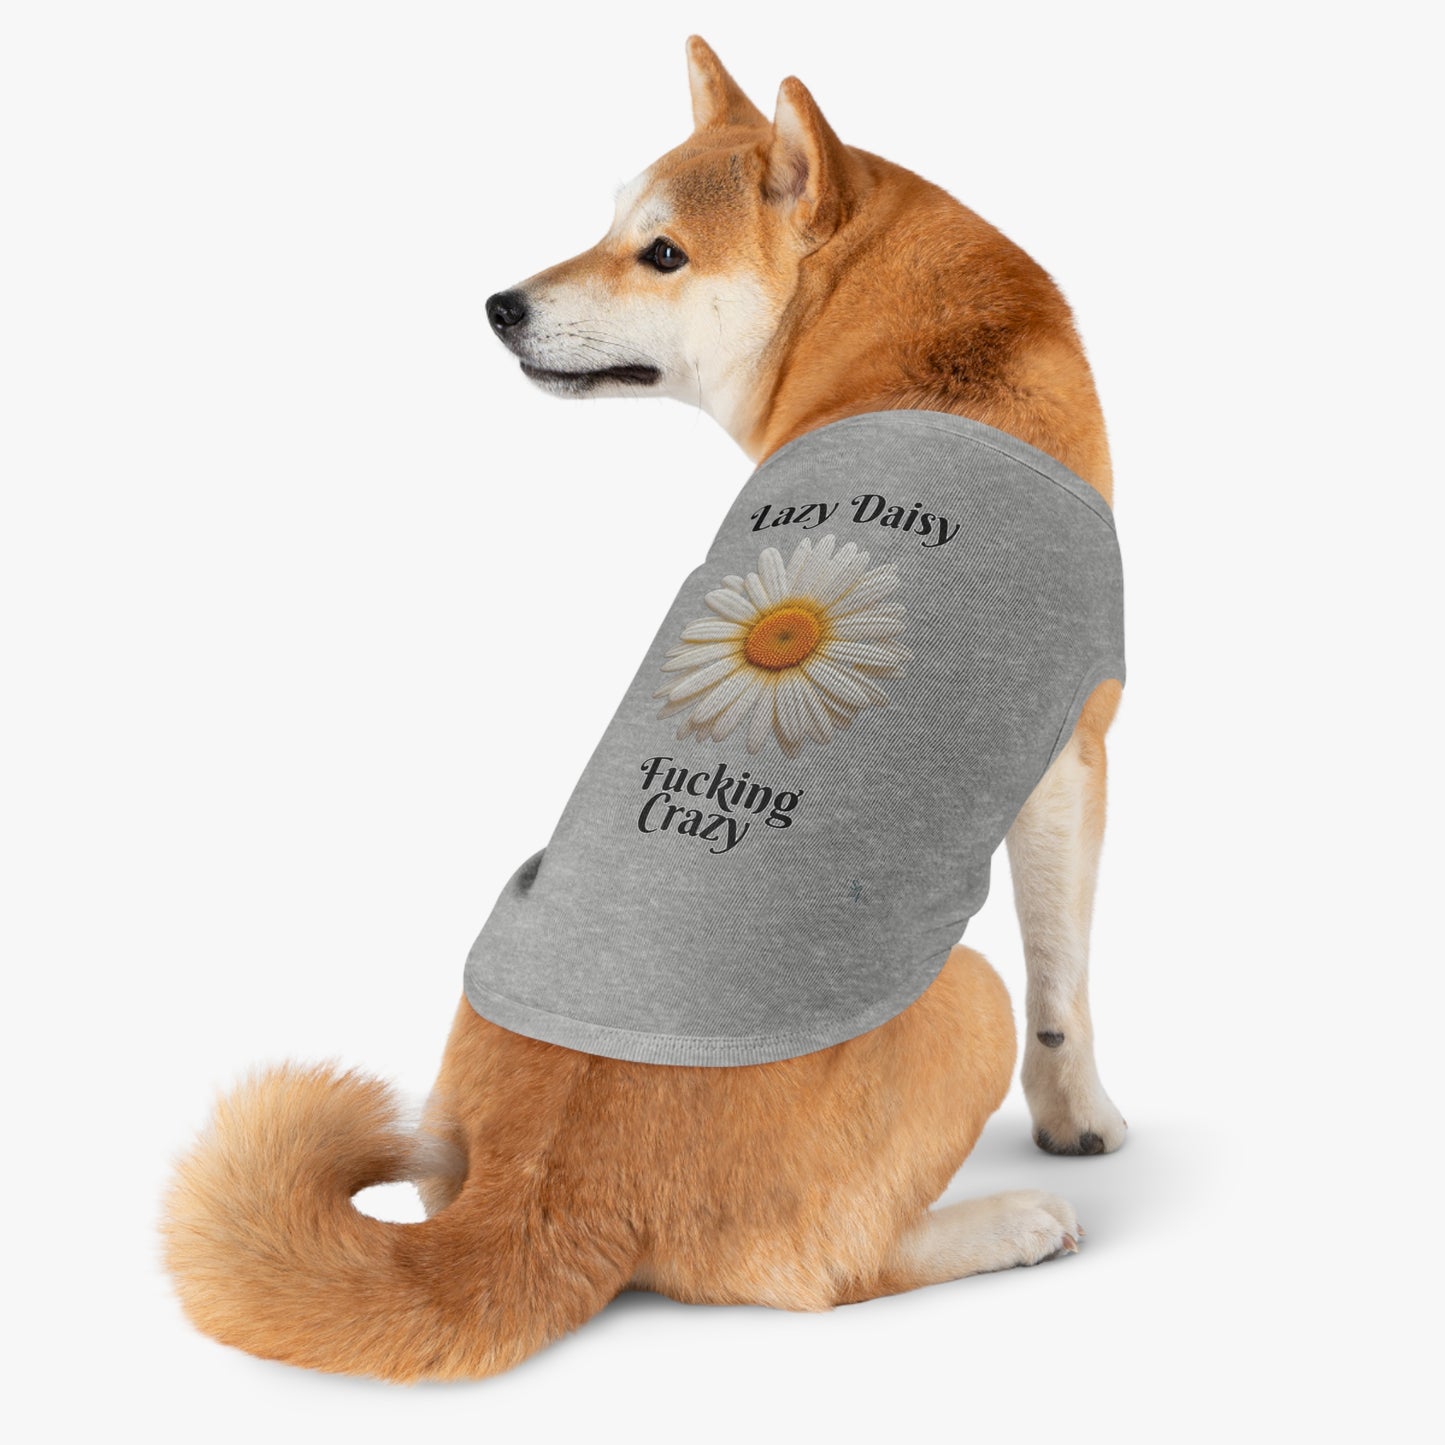 Lazy Daisy Fucking Crazy Pet Tank Top - Embrace the Quirkiness of Your Furry Friend